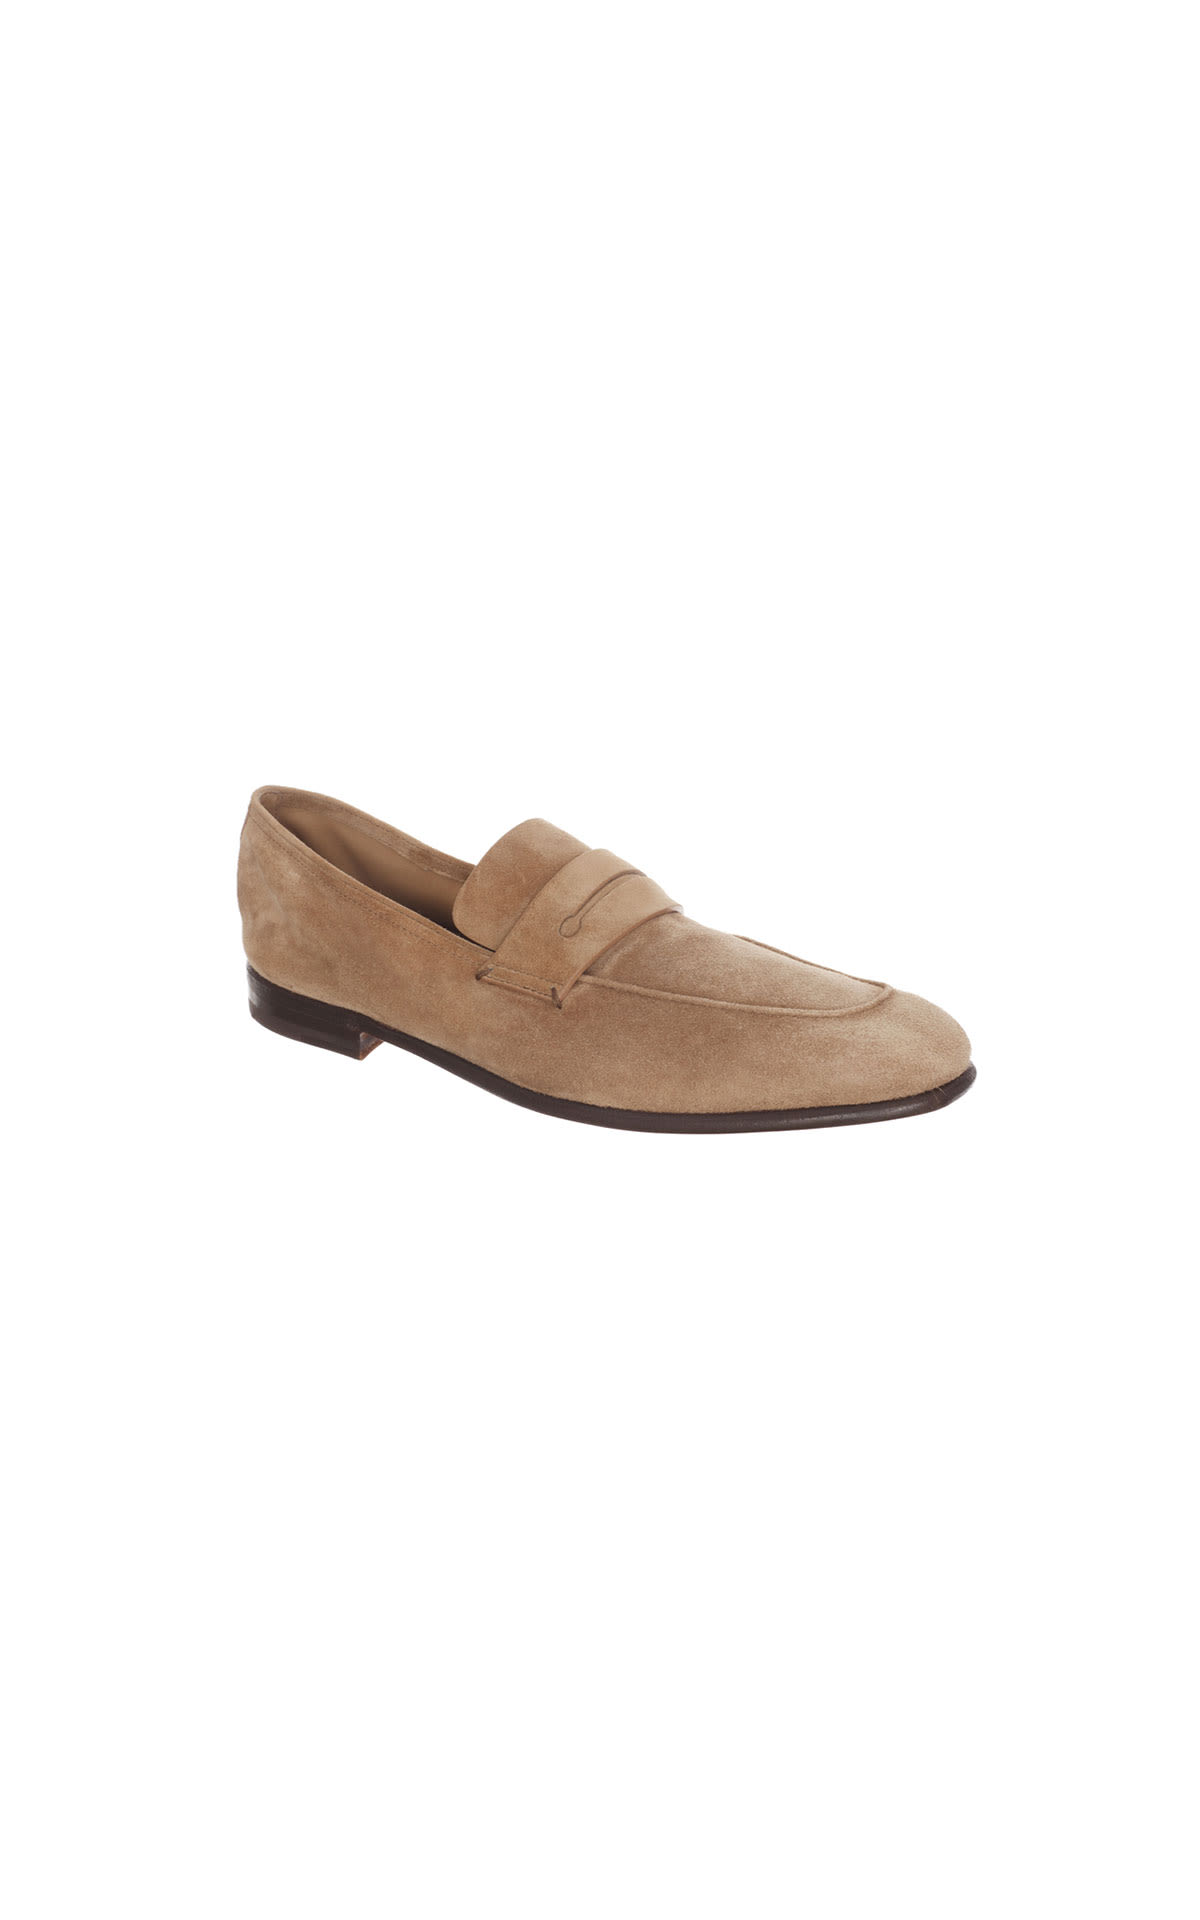 Zegna Suede loafers from Bicester Village